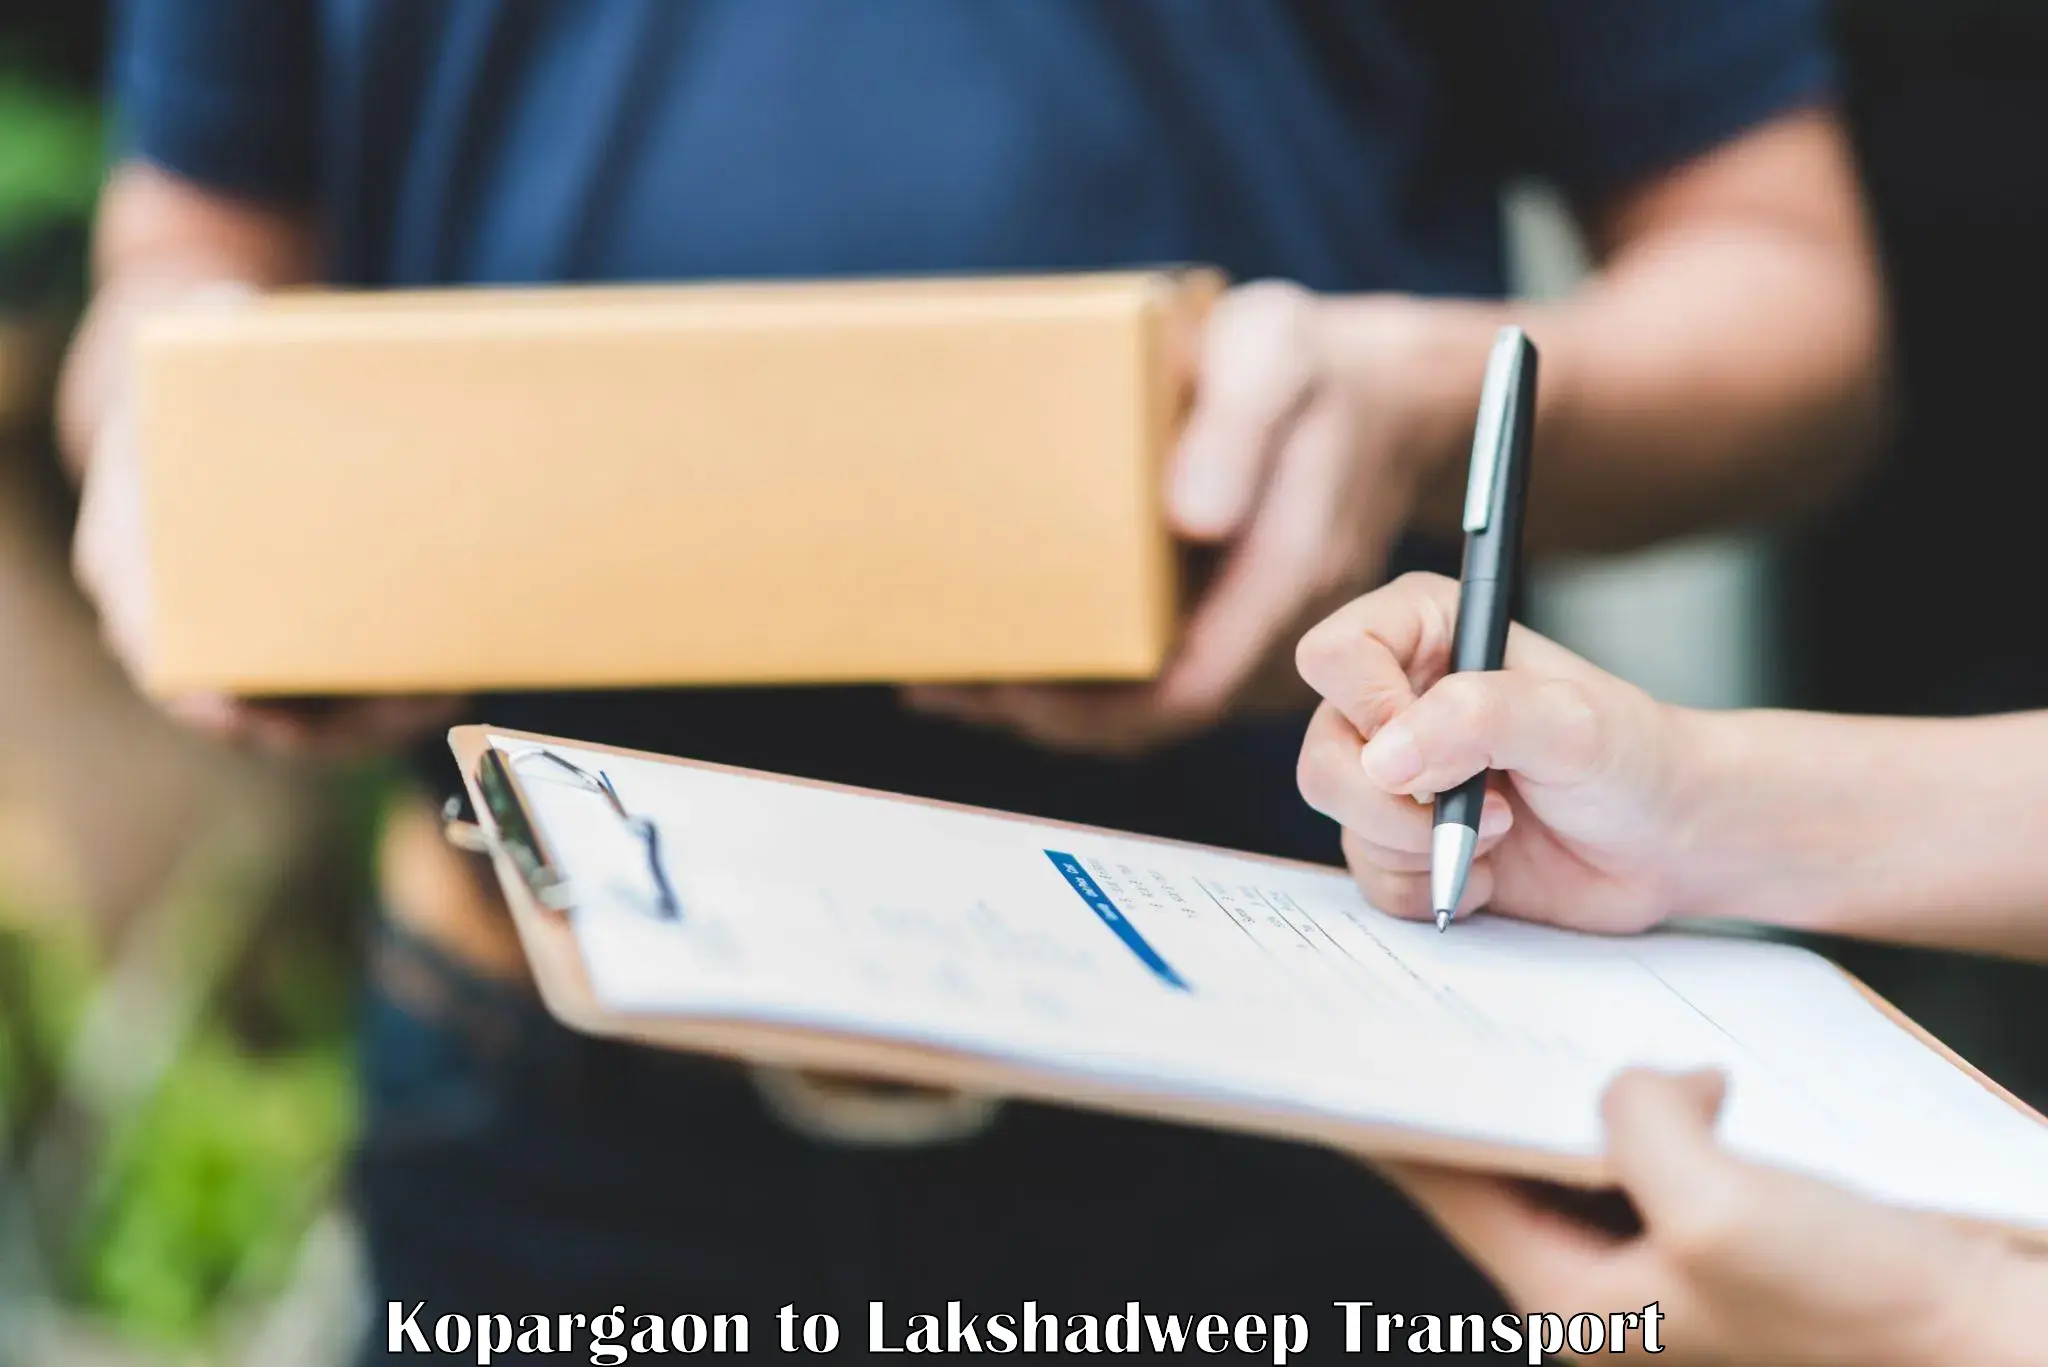 Transport bike from one state to another in Kopargaon to Lakshadweep